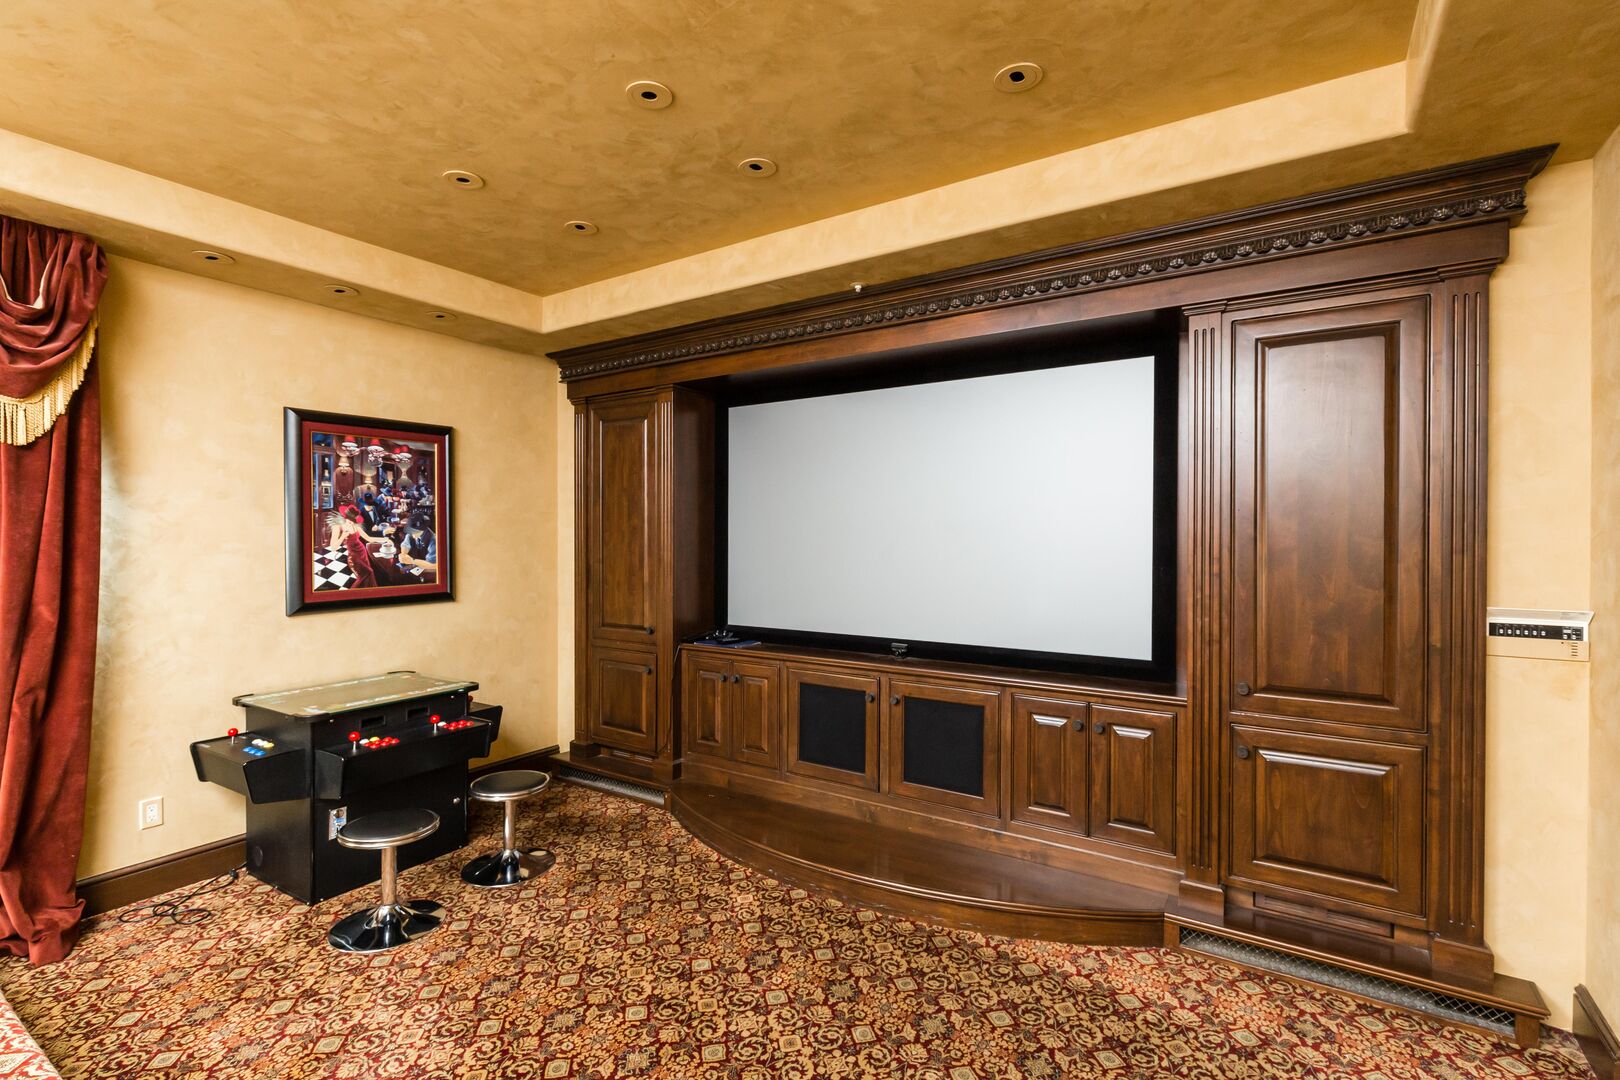 Movie Theatre room with a large projector and screen, comfortable movie recliners and classic arcade games.